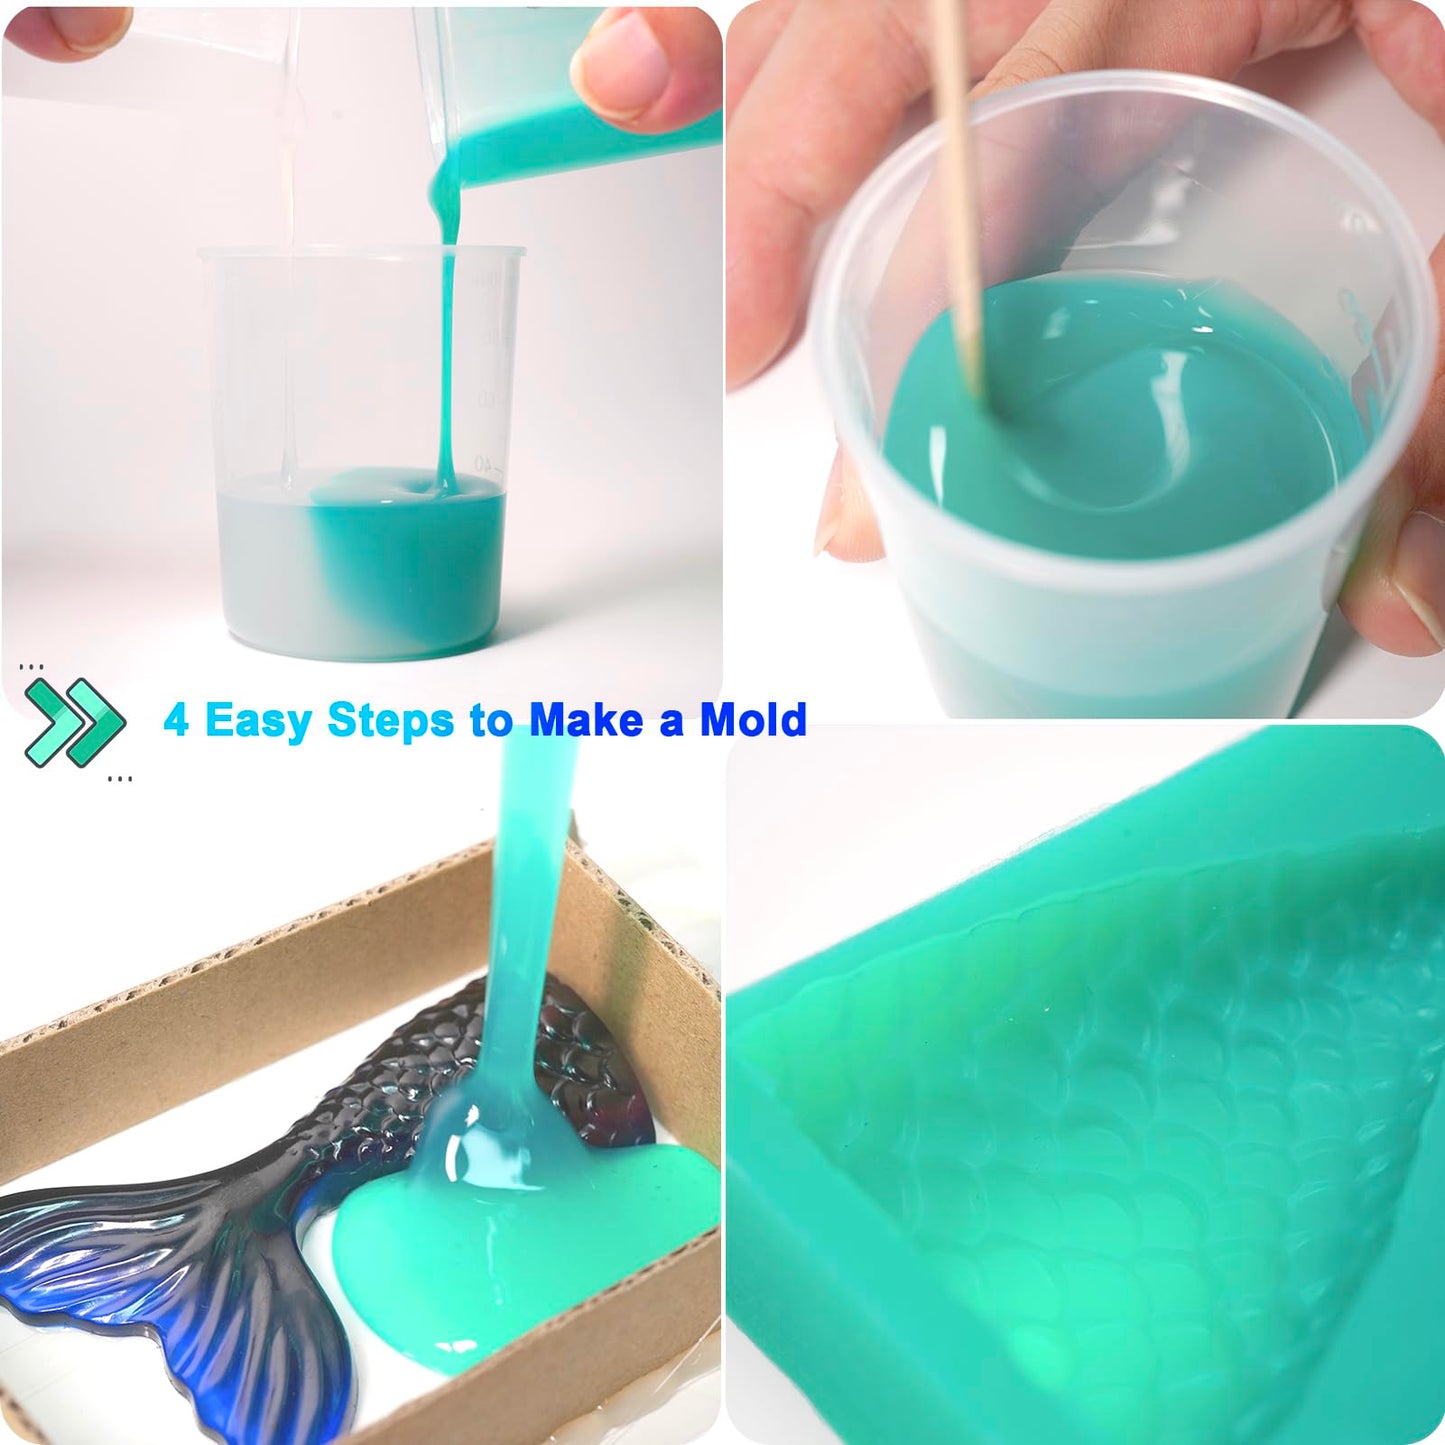 BBDINO Super Elastic Silicone Mold Making Kit, Liquid Silicone for Mold Making, Silicone Rubber Mold Making Kit 1:1 by Volume Ideal for Casting 3D